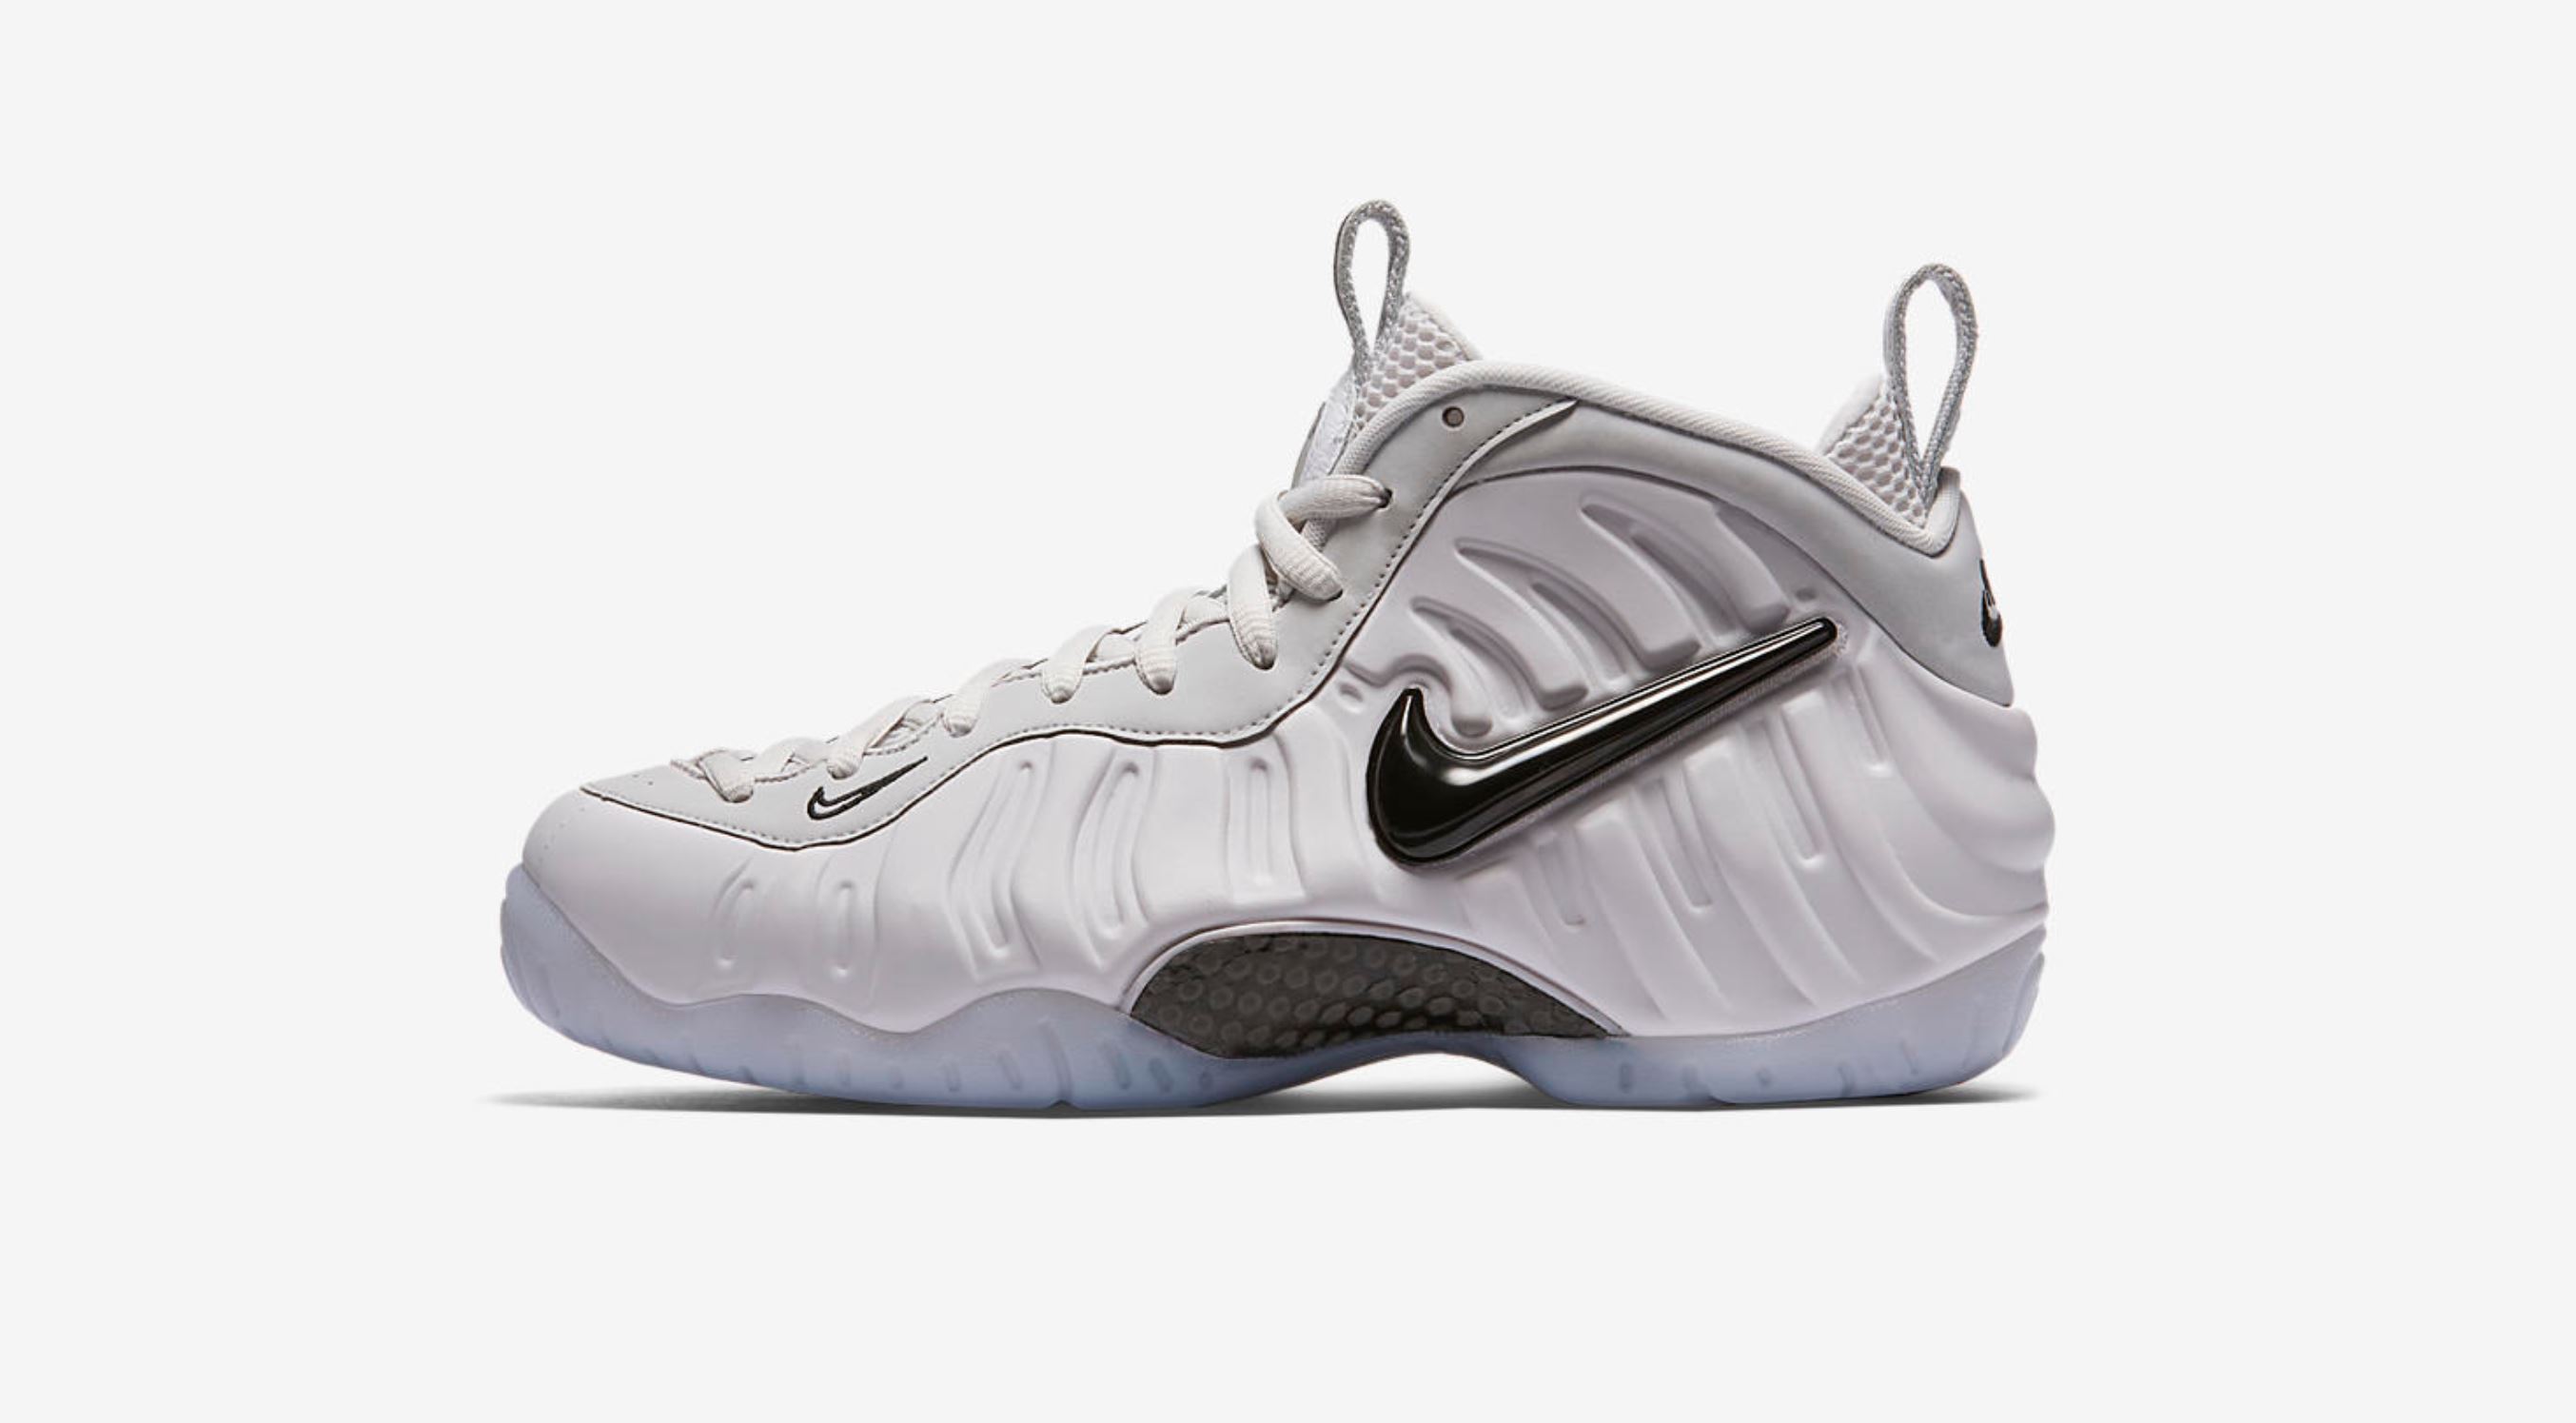 The Nike Air Foamposite Pro 'Swoosh Flavors' Sports Removable 